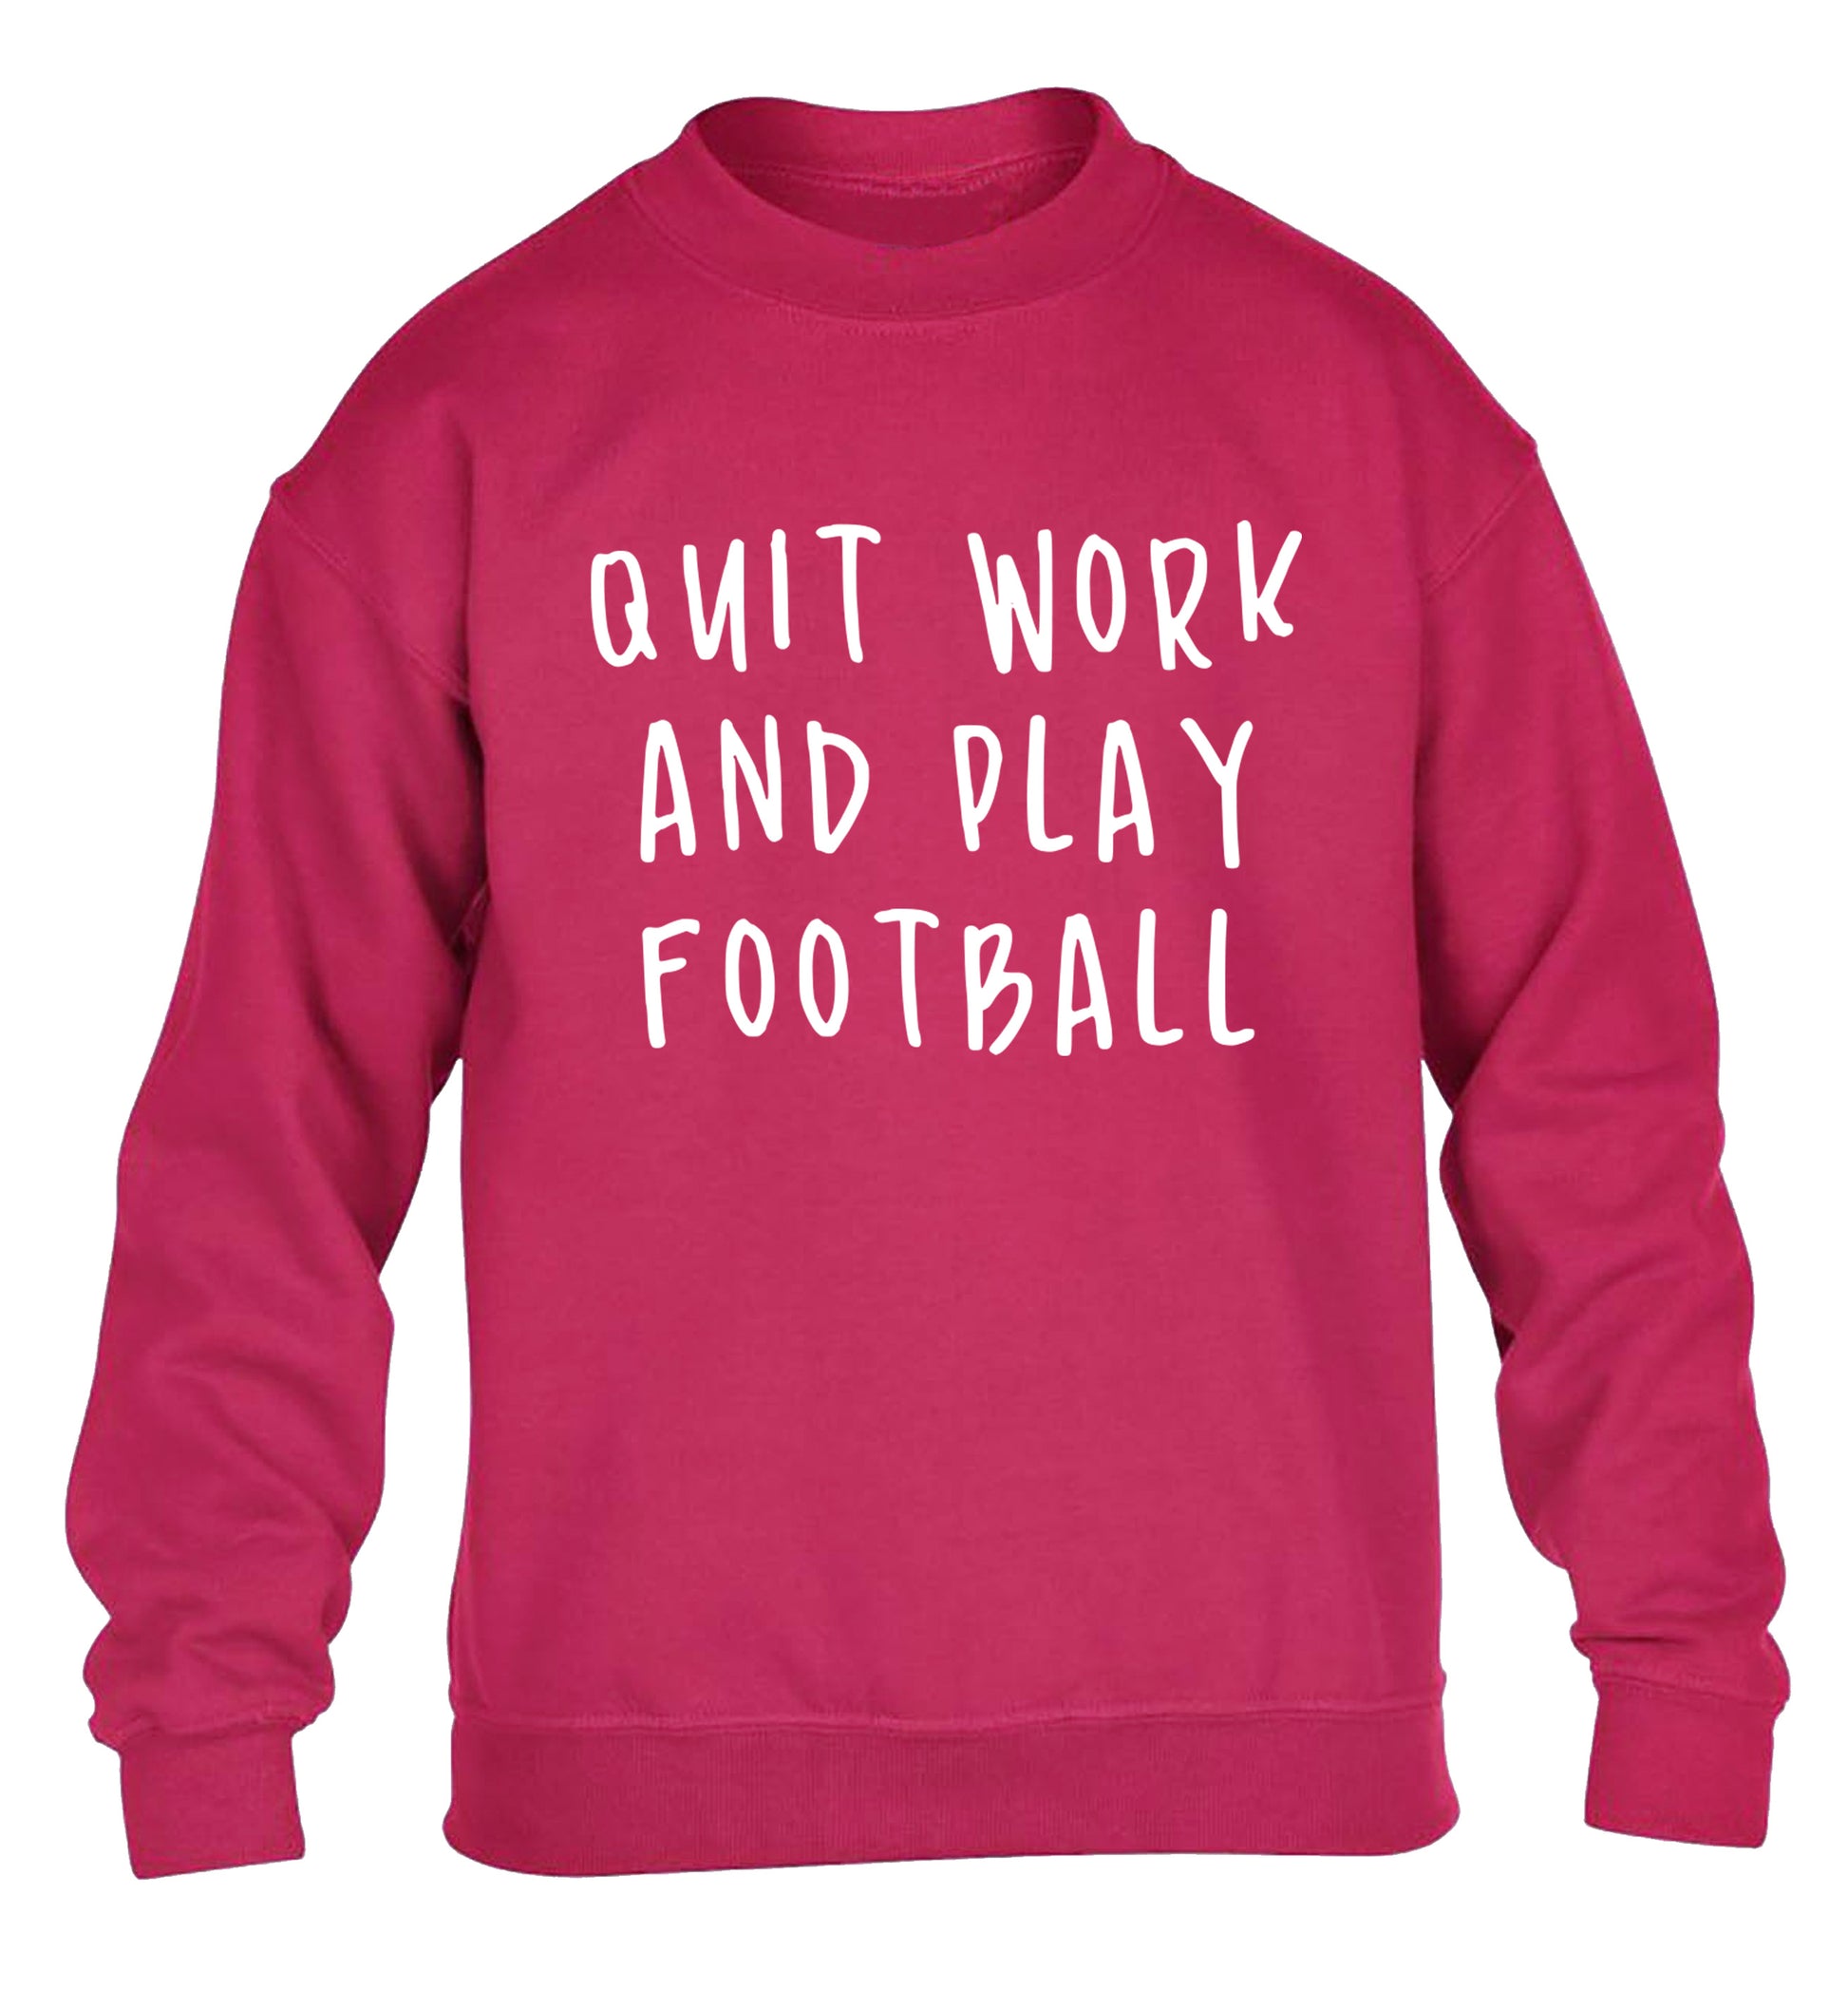 Quit work play football children's pink sweater 12-14 Years